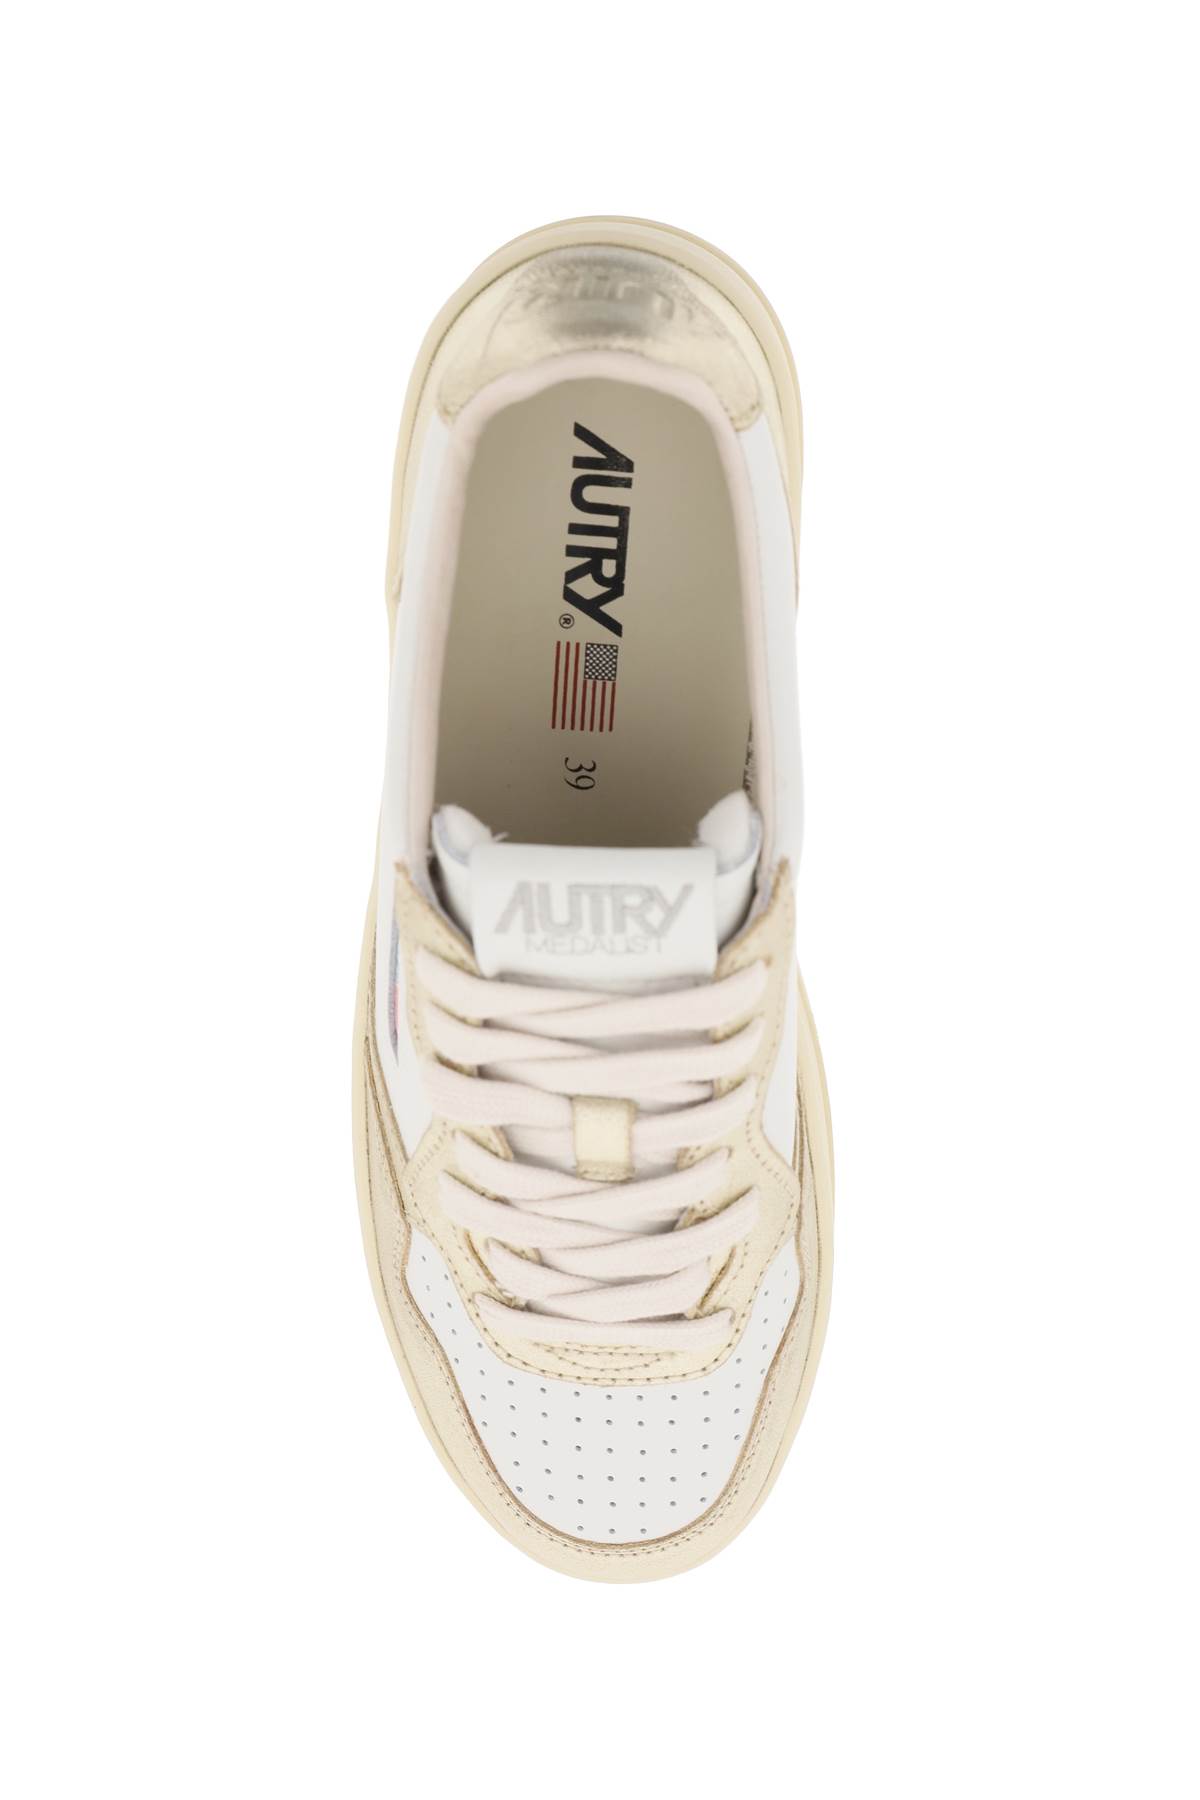 Shop Autry Medalist Low Sneakers In White Platinum (white)